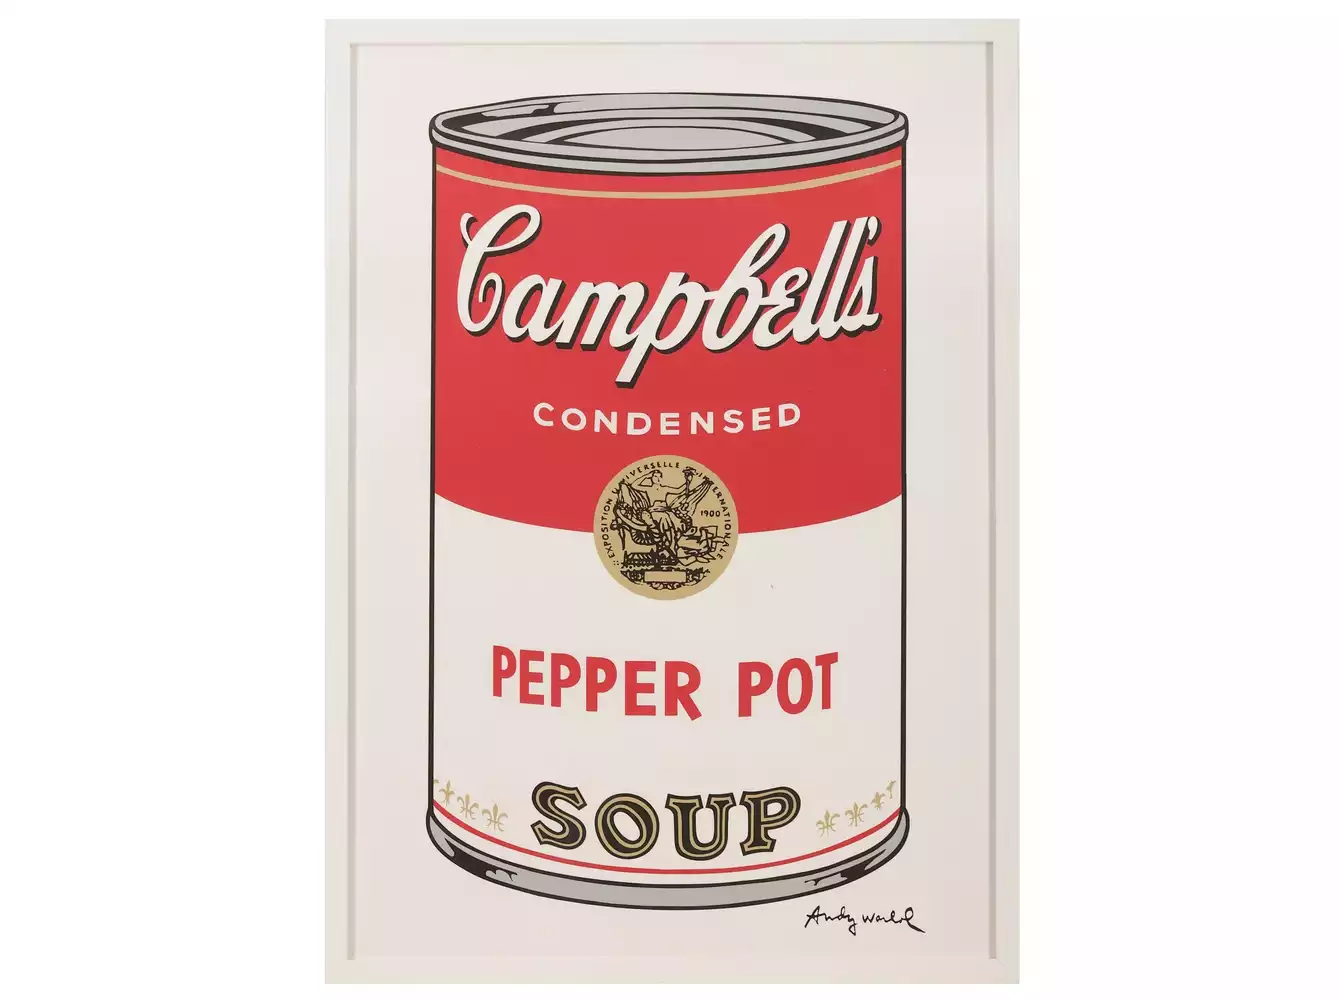 In-2006-the-Small-Torn-Campbell's-Soup-Can-was-sold-for-dollar11.8-million.